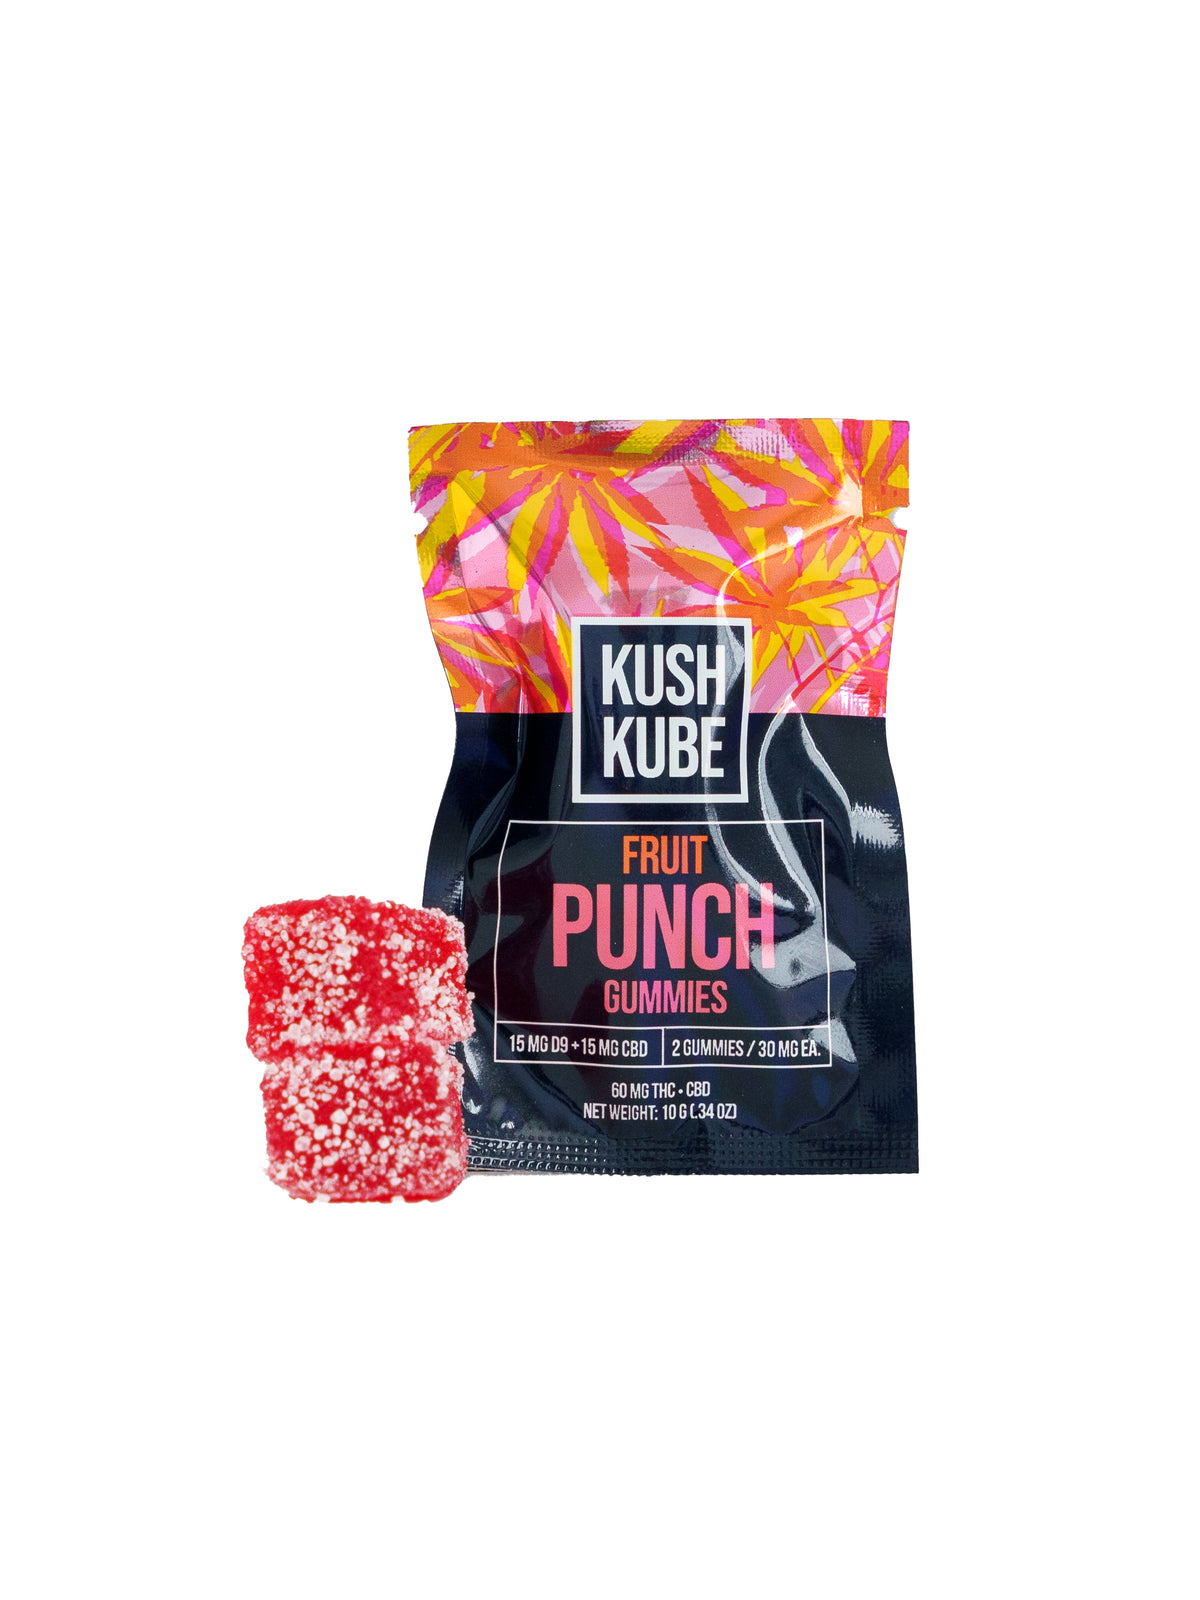 Fruit Punch -  30 - 2 Pack Box